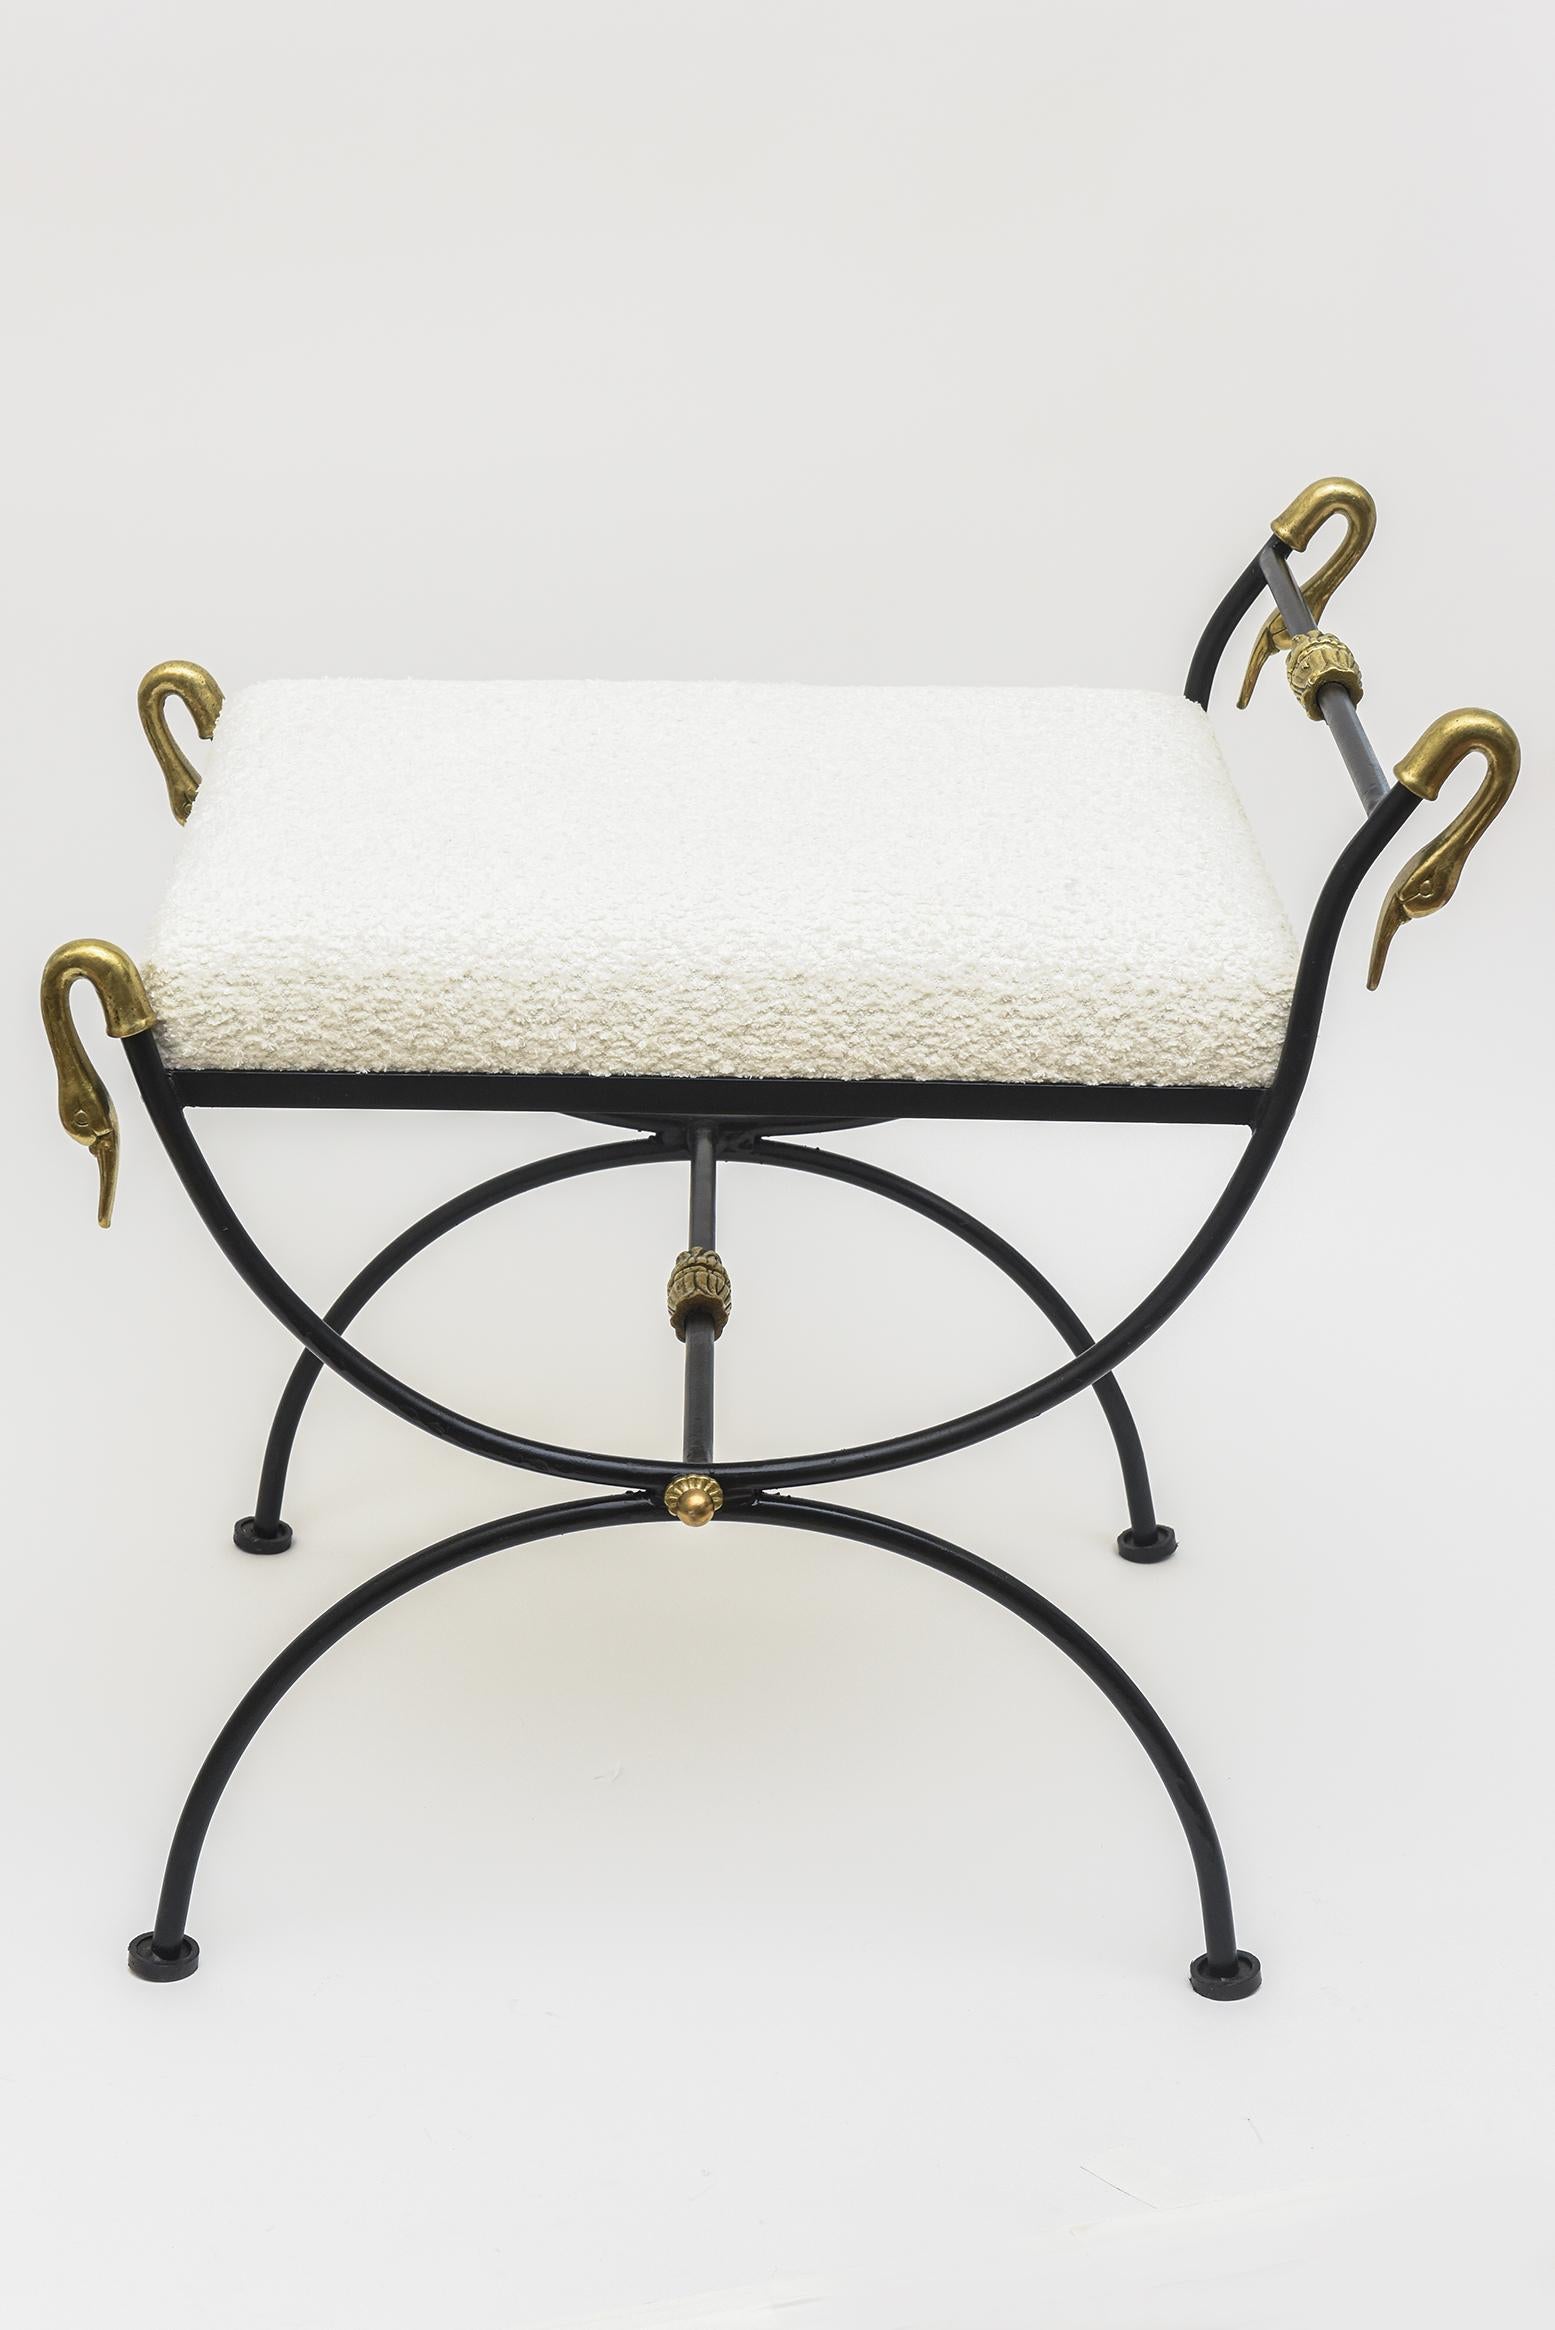 This fully restored vintage Italian swan bench is black painted iron, brass, wood and new upholstery of white boucle. It is from the 60's. It has all been redone from top to bottom and all the brass was polished. There are 2 different heights of the